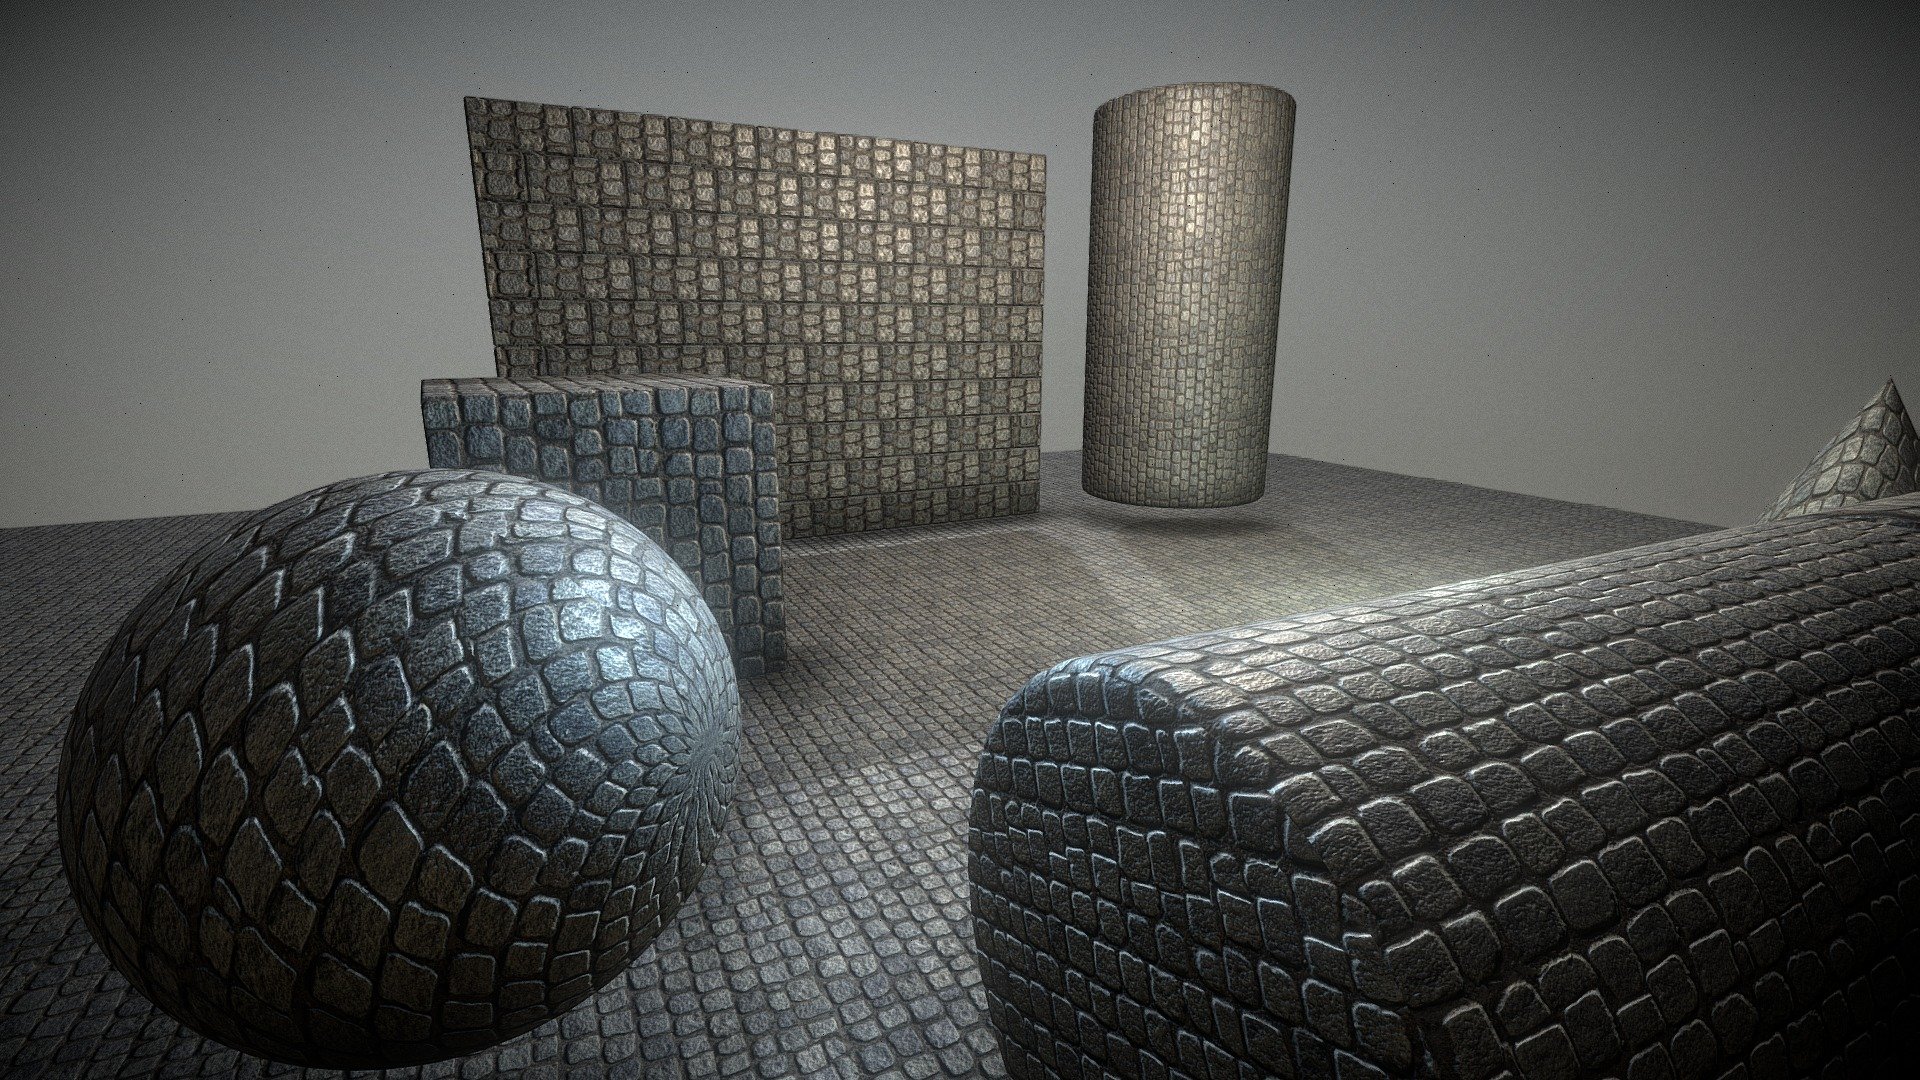 Here is another seamless and tileable texture set for cobblestone.

Texture size 4k. 



 

 

Texture types included:




Colormap

Normalmap

Ao

Cavity

Photographed and later edited with Blender 3d model